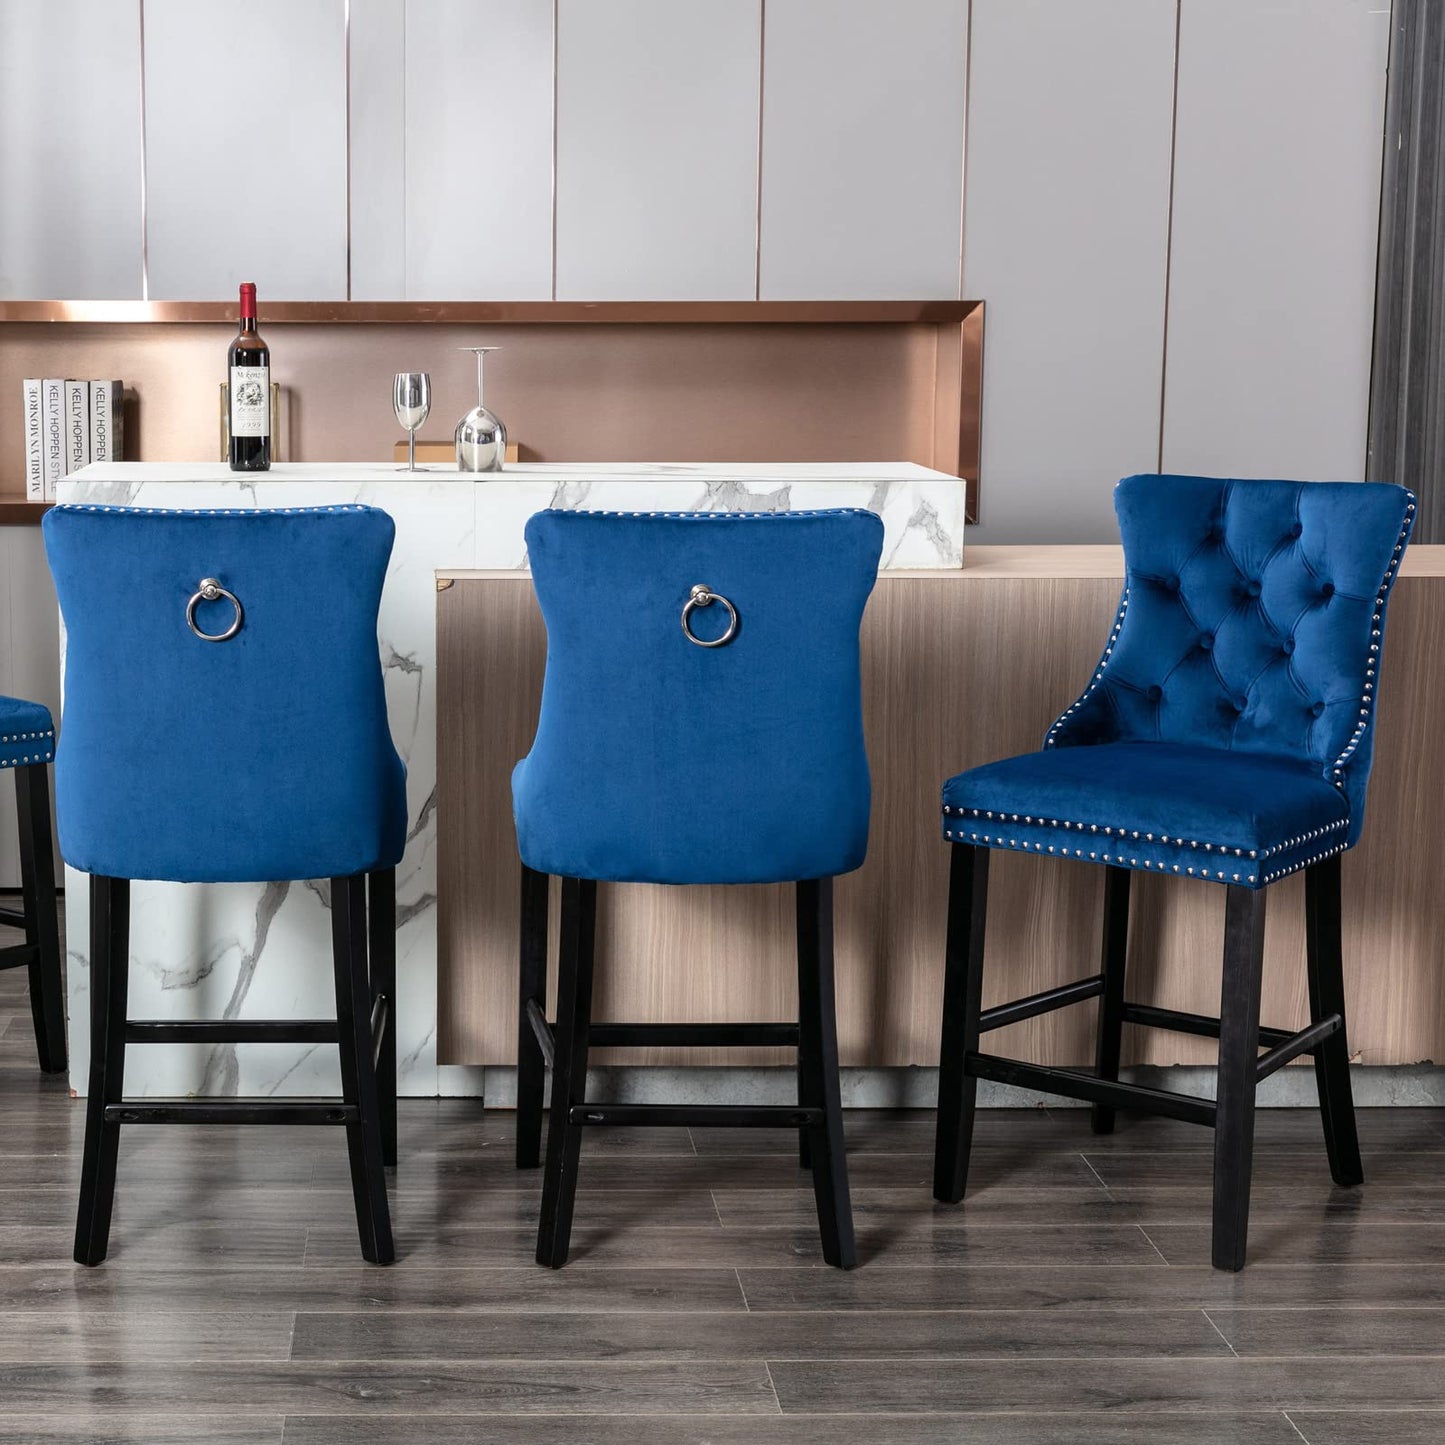 2X Velvet Bar Stools with Studs Trim Wooden Legs Tufted Dining Chairs Kitchen - image21